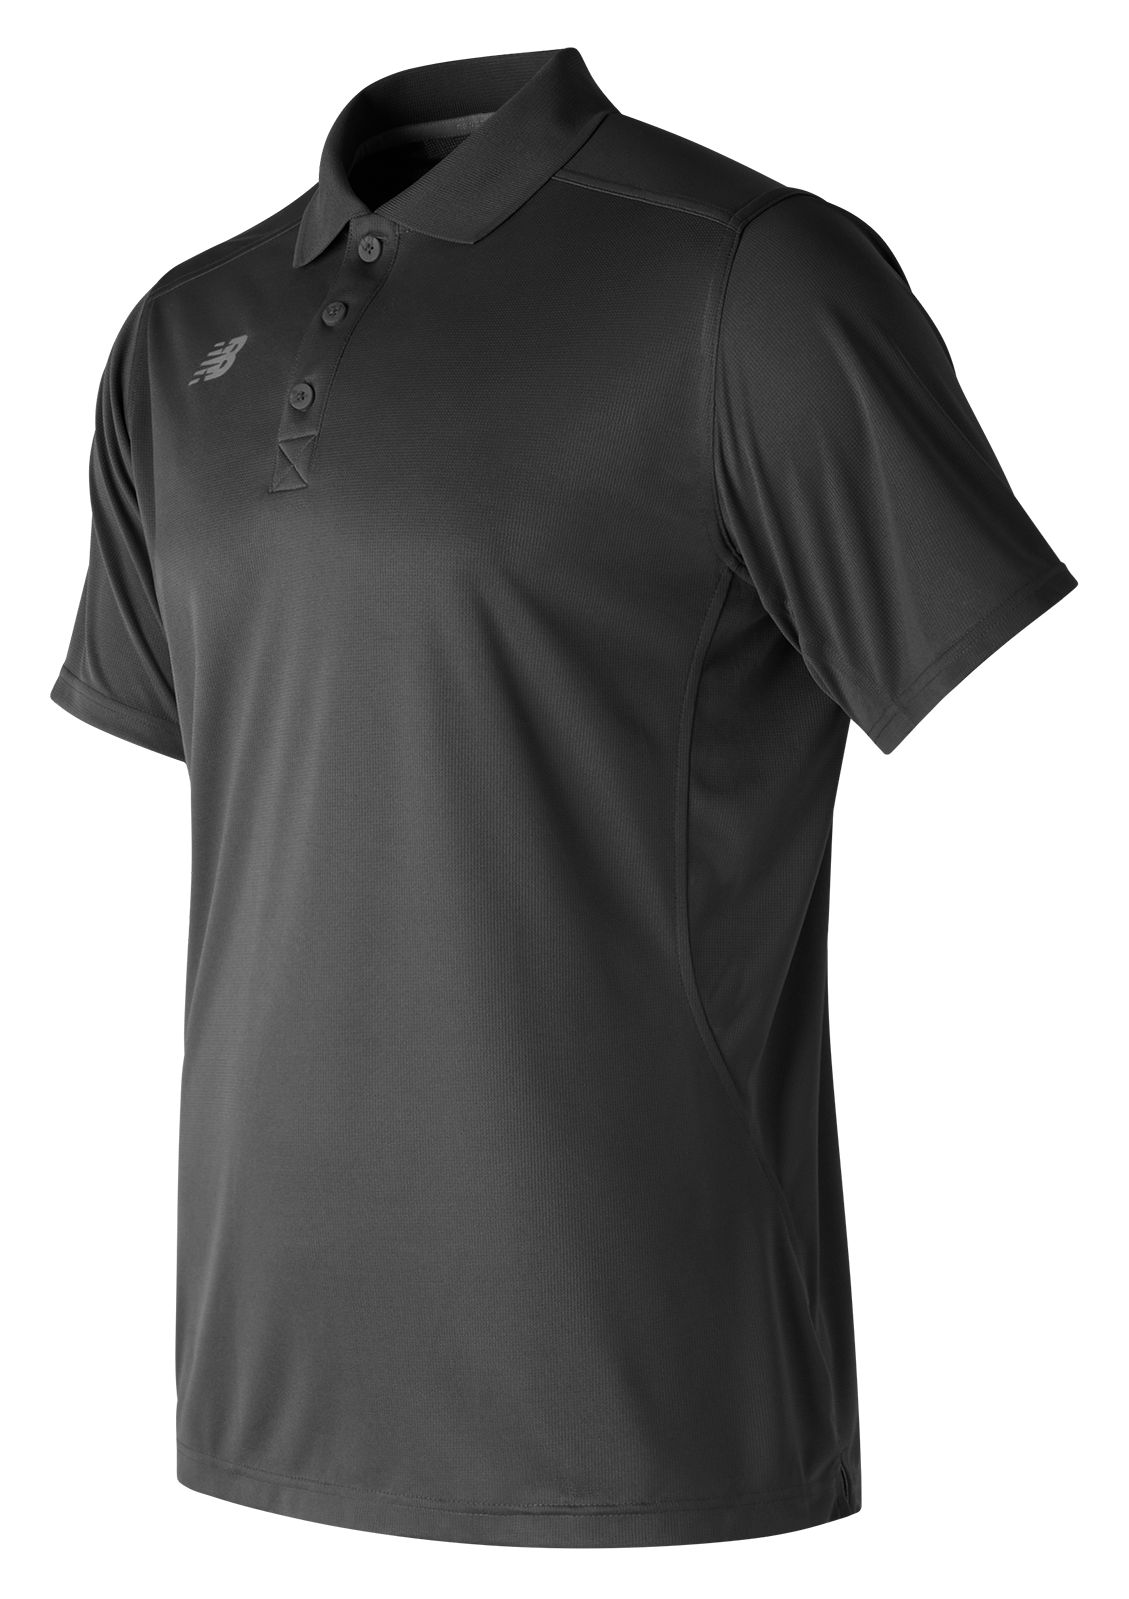 Performance Tech Polo, Team Black image number 0